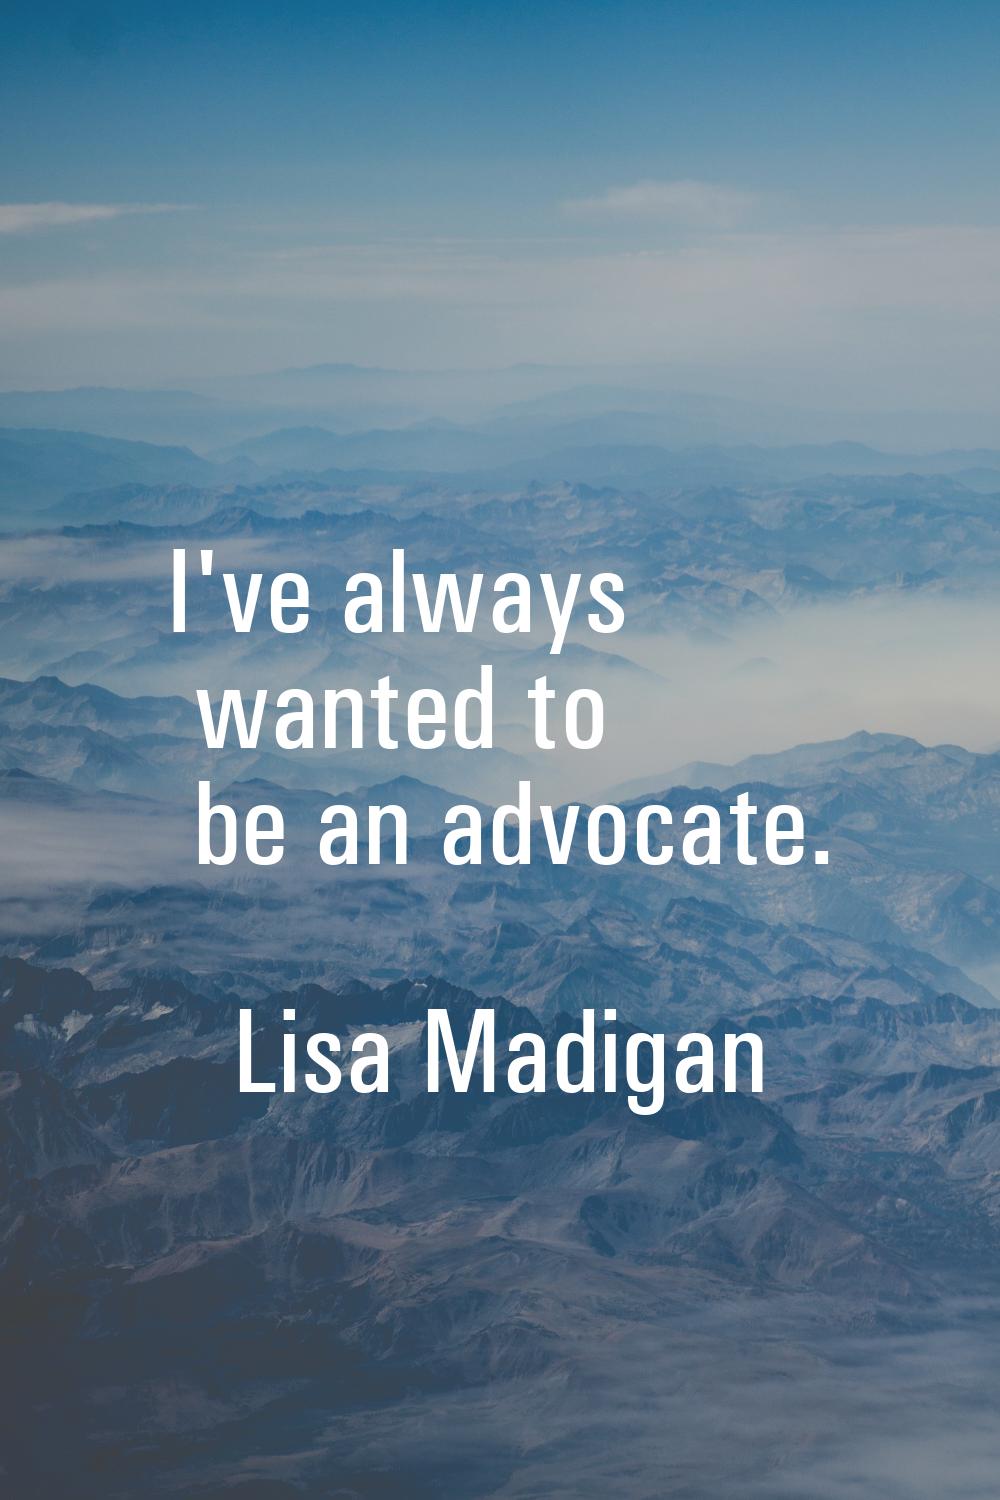 I've always wanted to be an advocate.